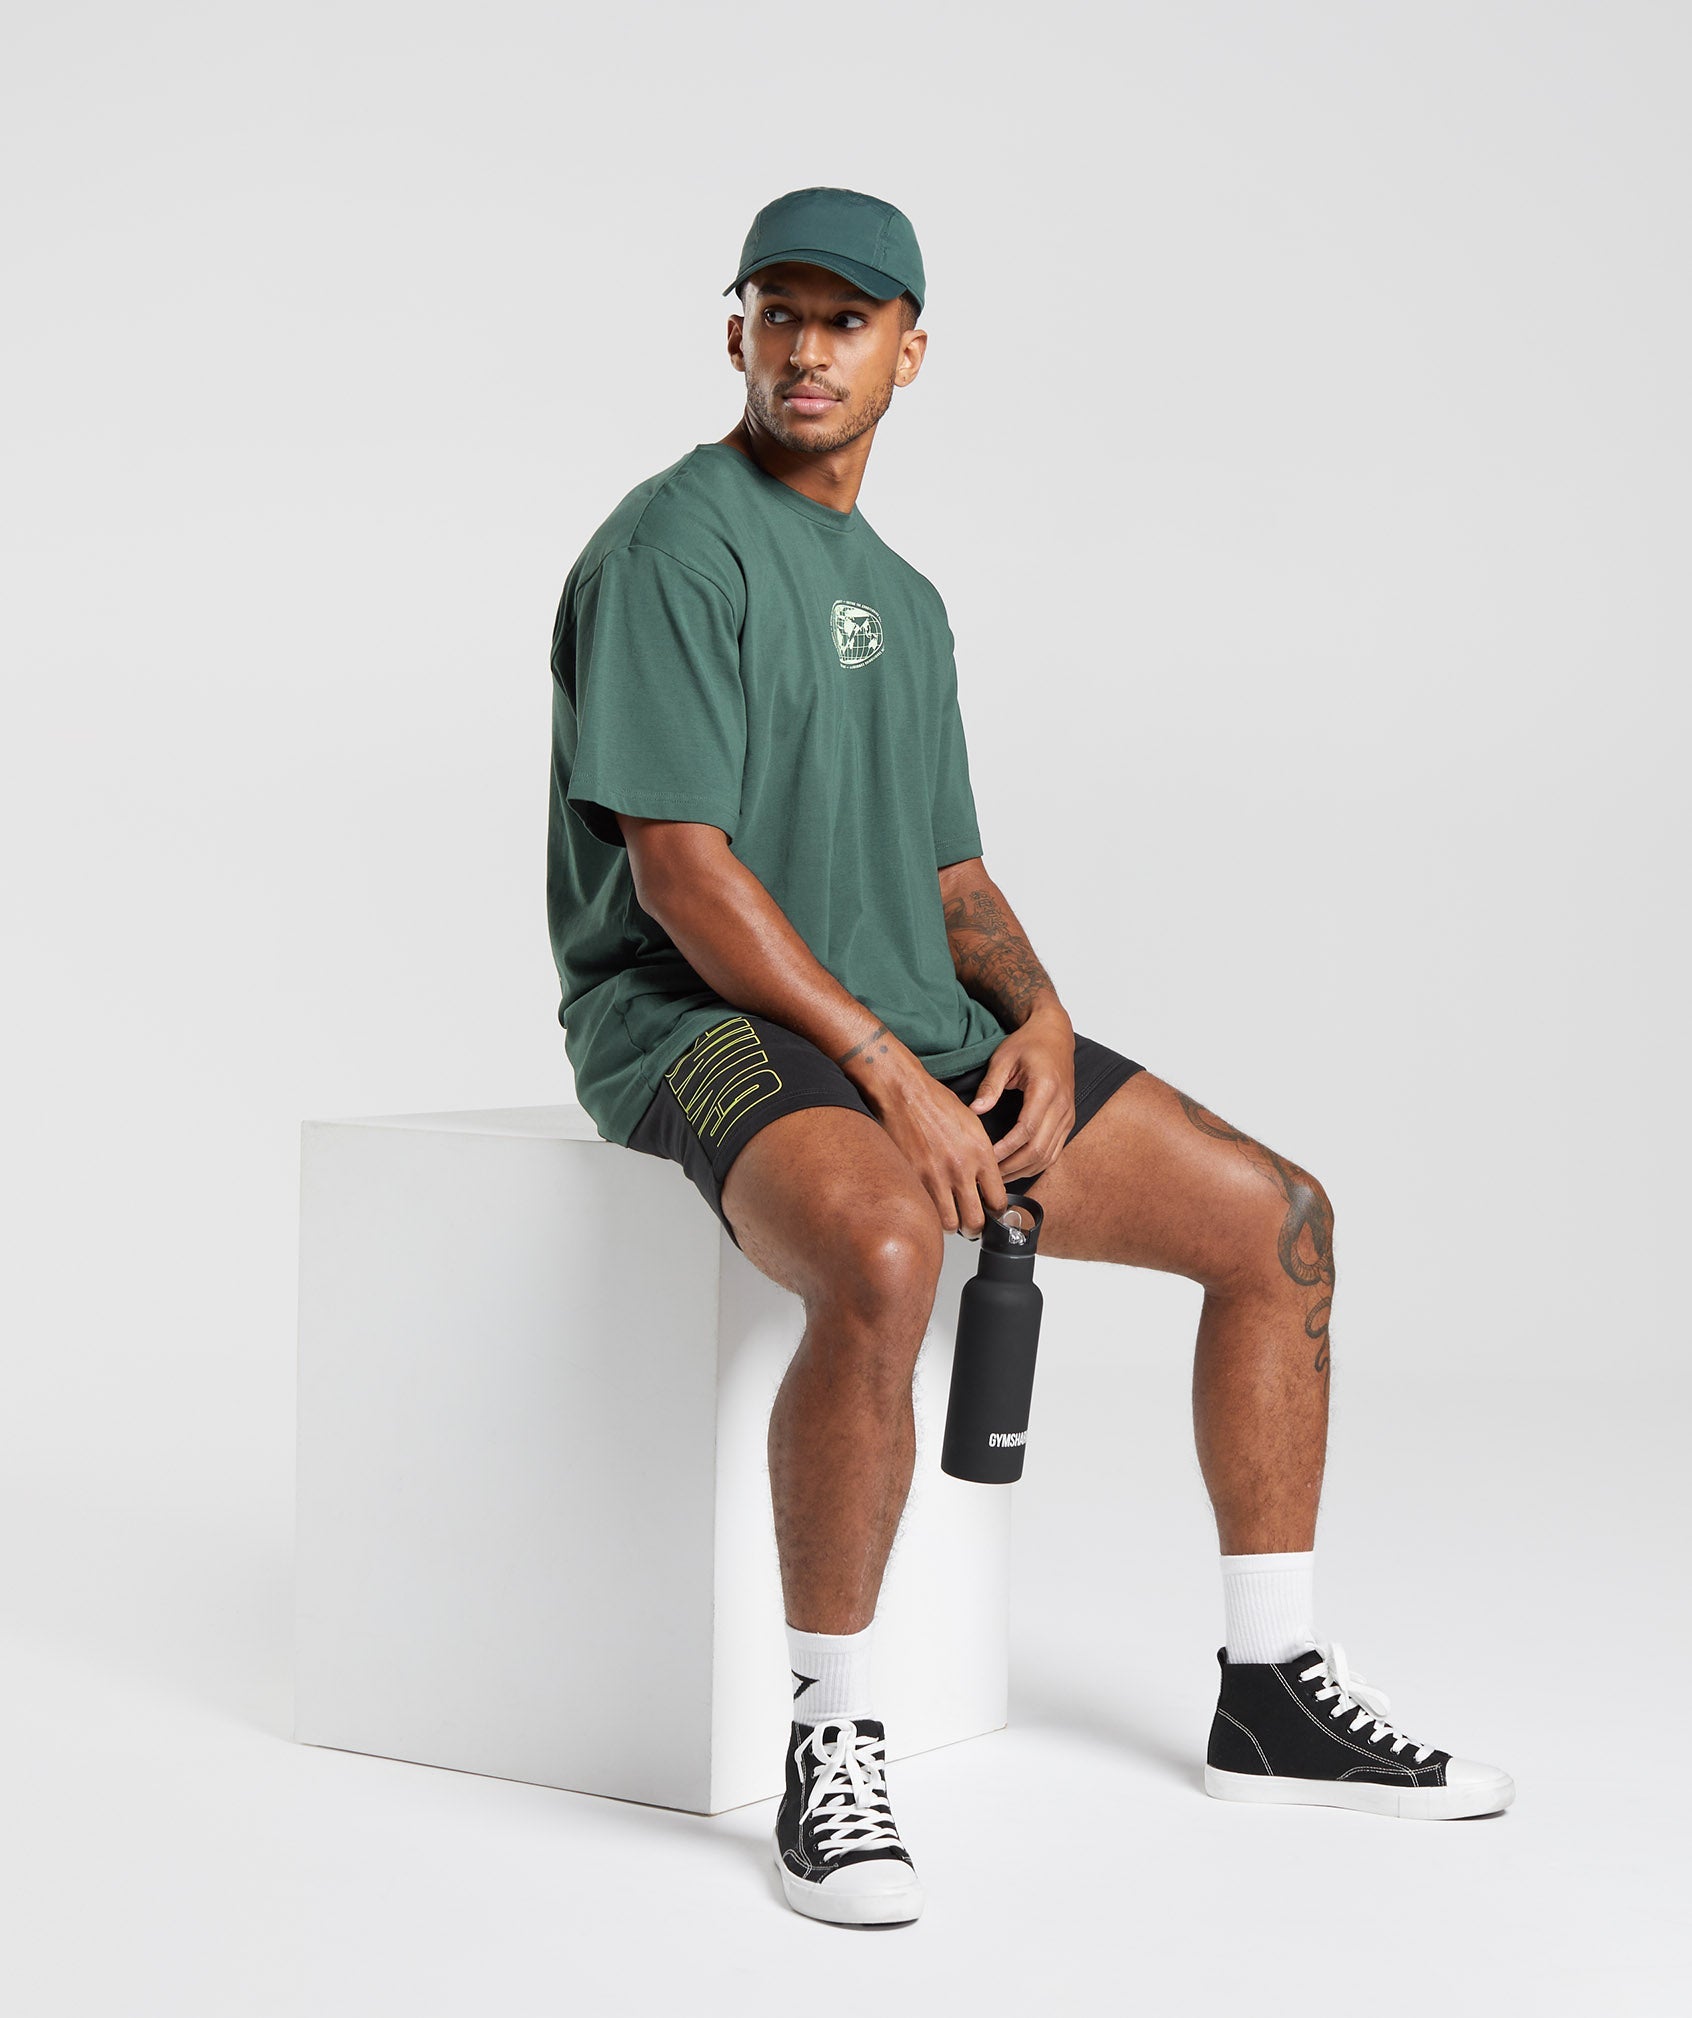 Recovery Graphic T-Shirt in Obsidian Green - view 4